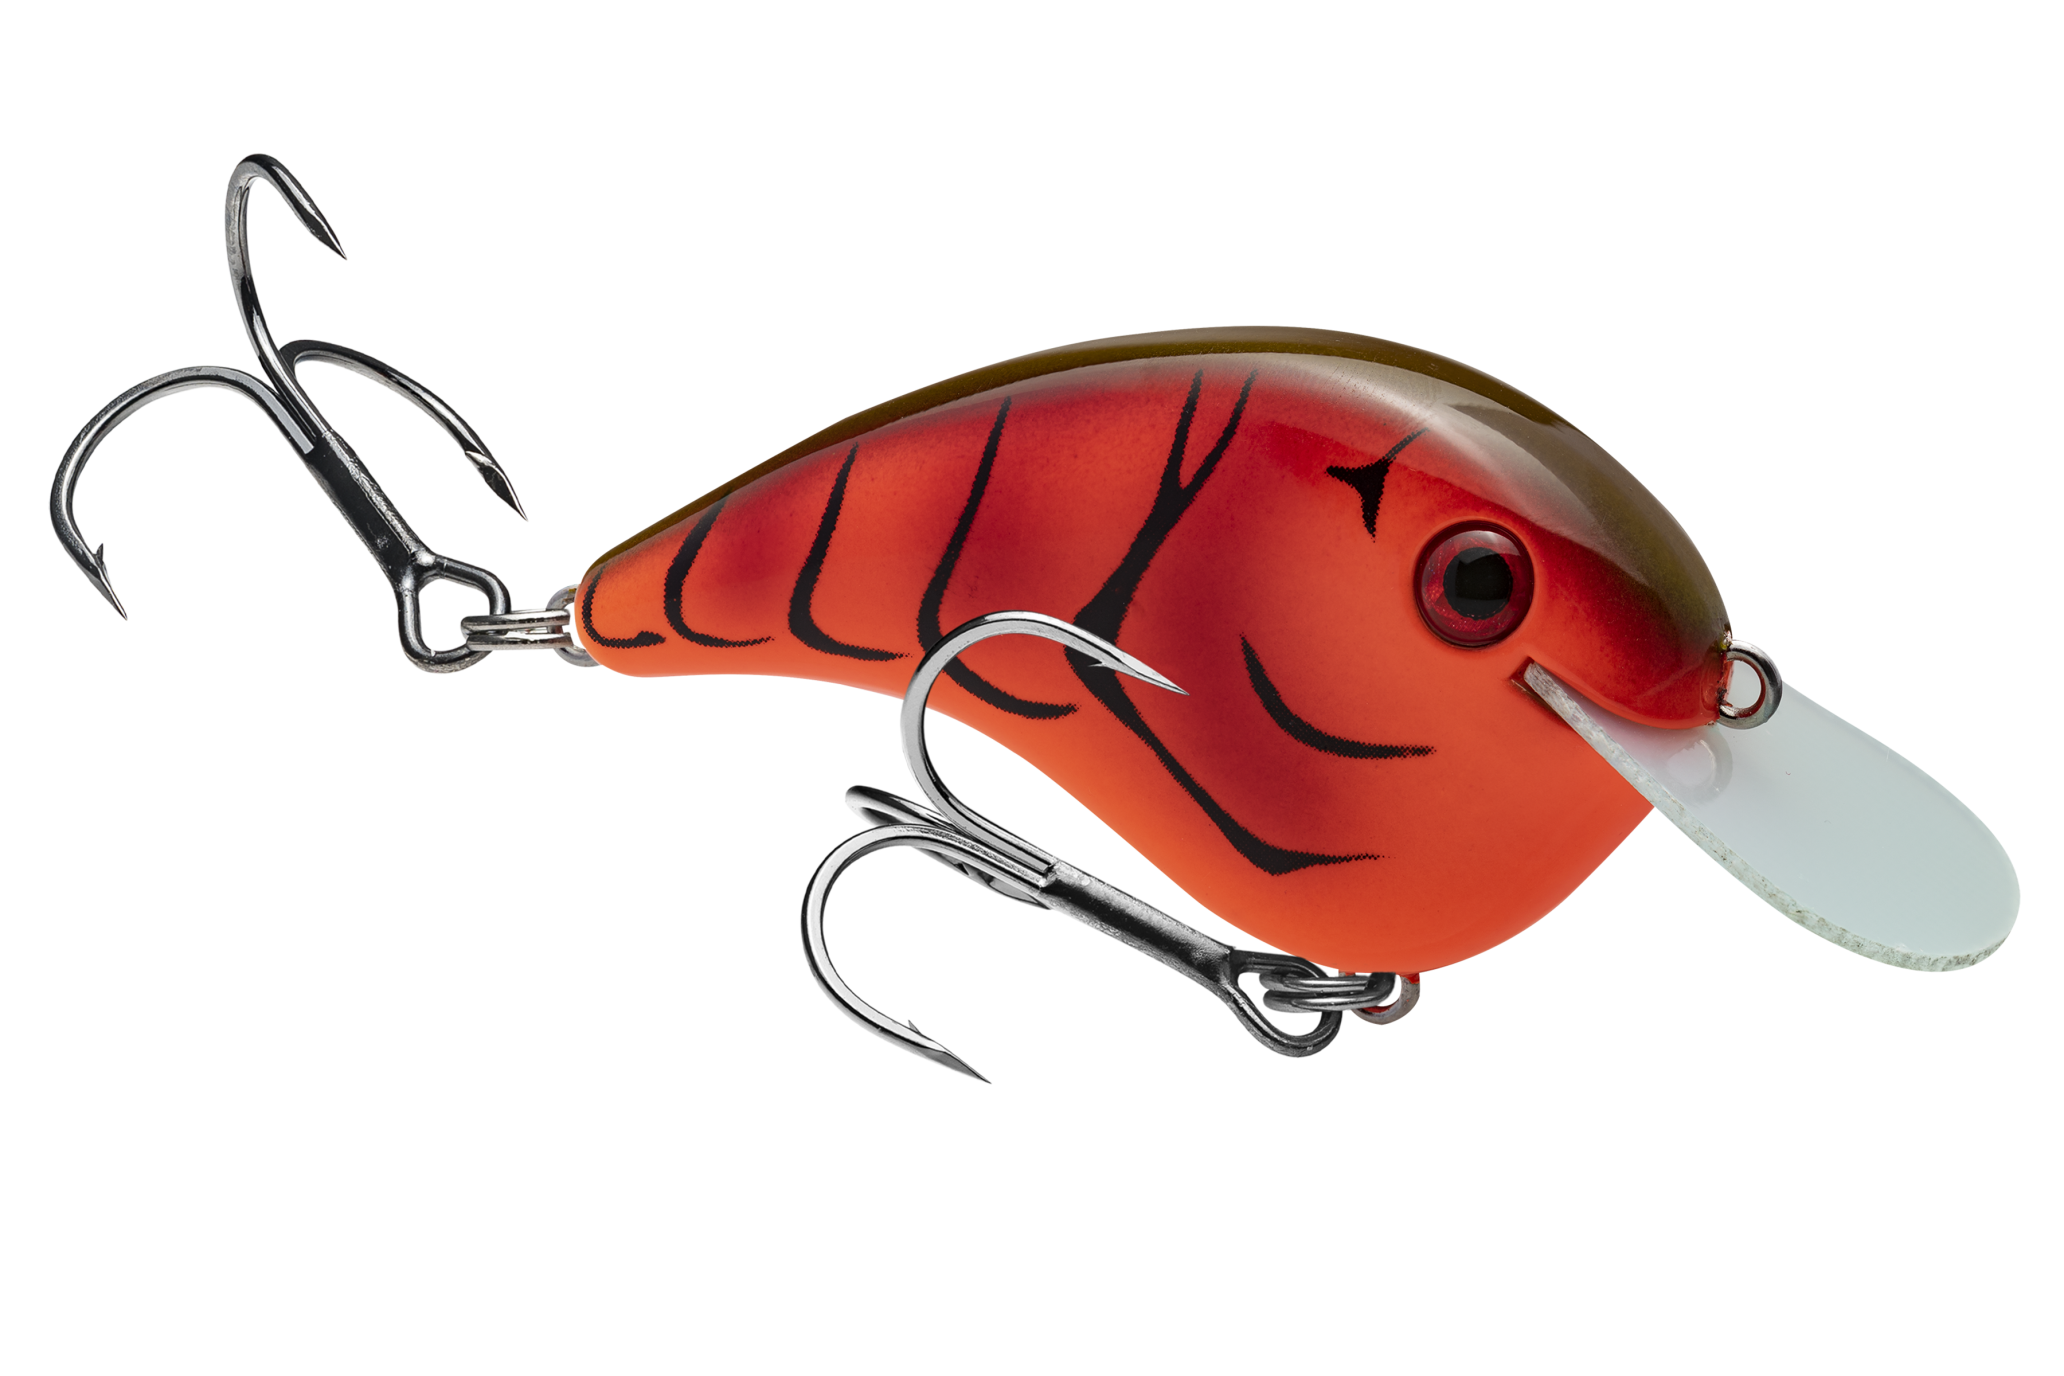 Strike King Introduces the Weedless Squadron Head